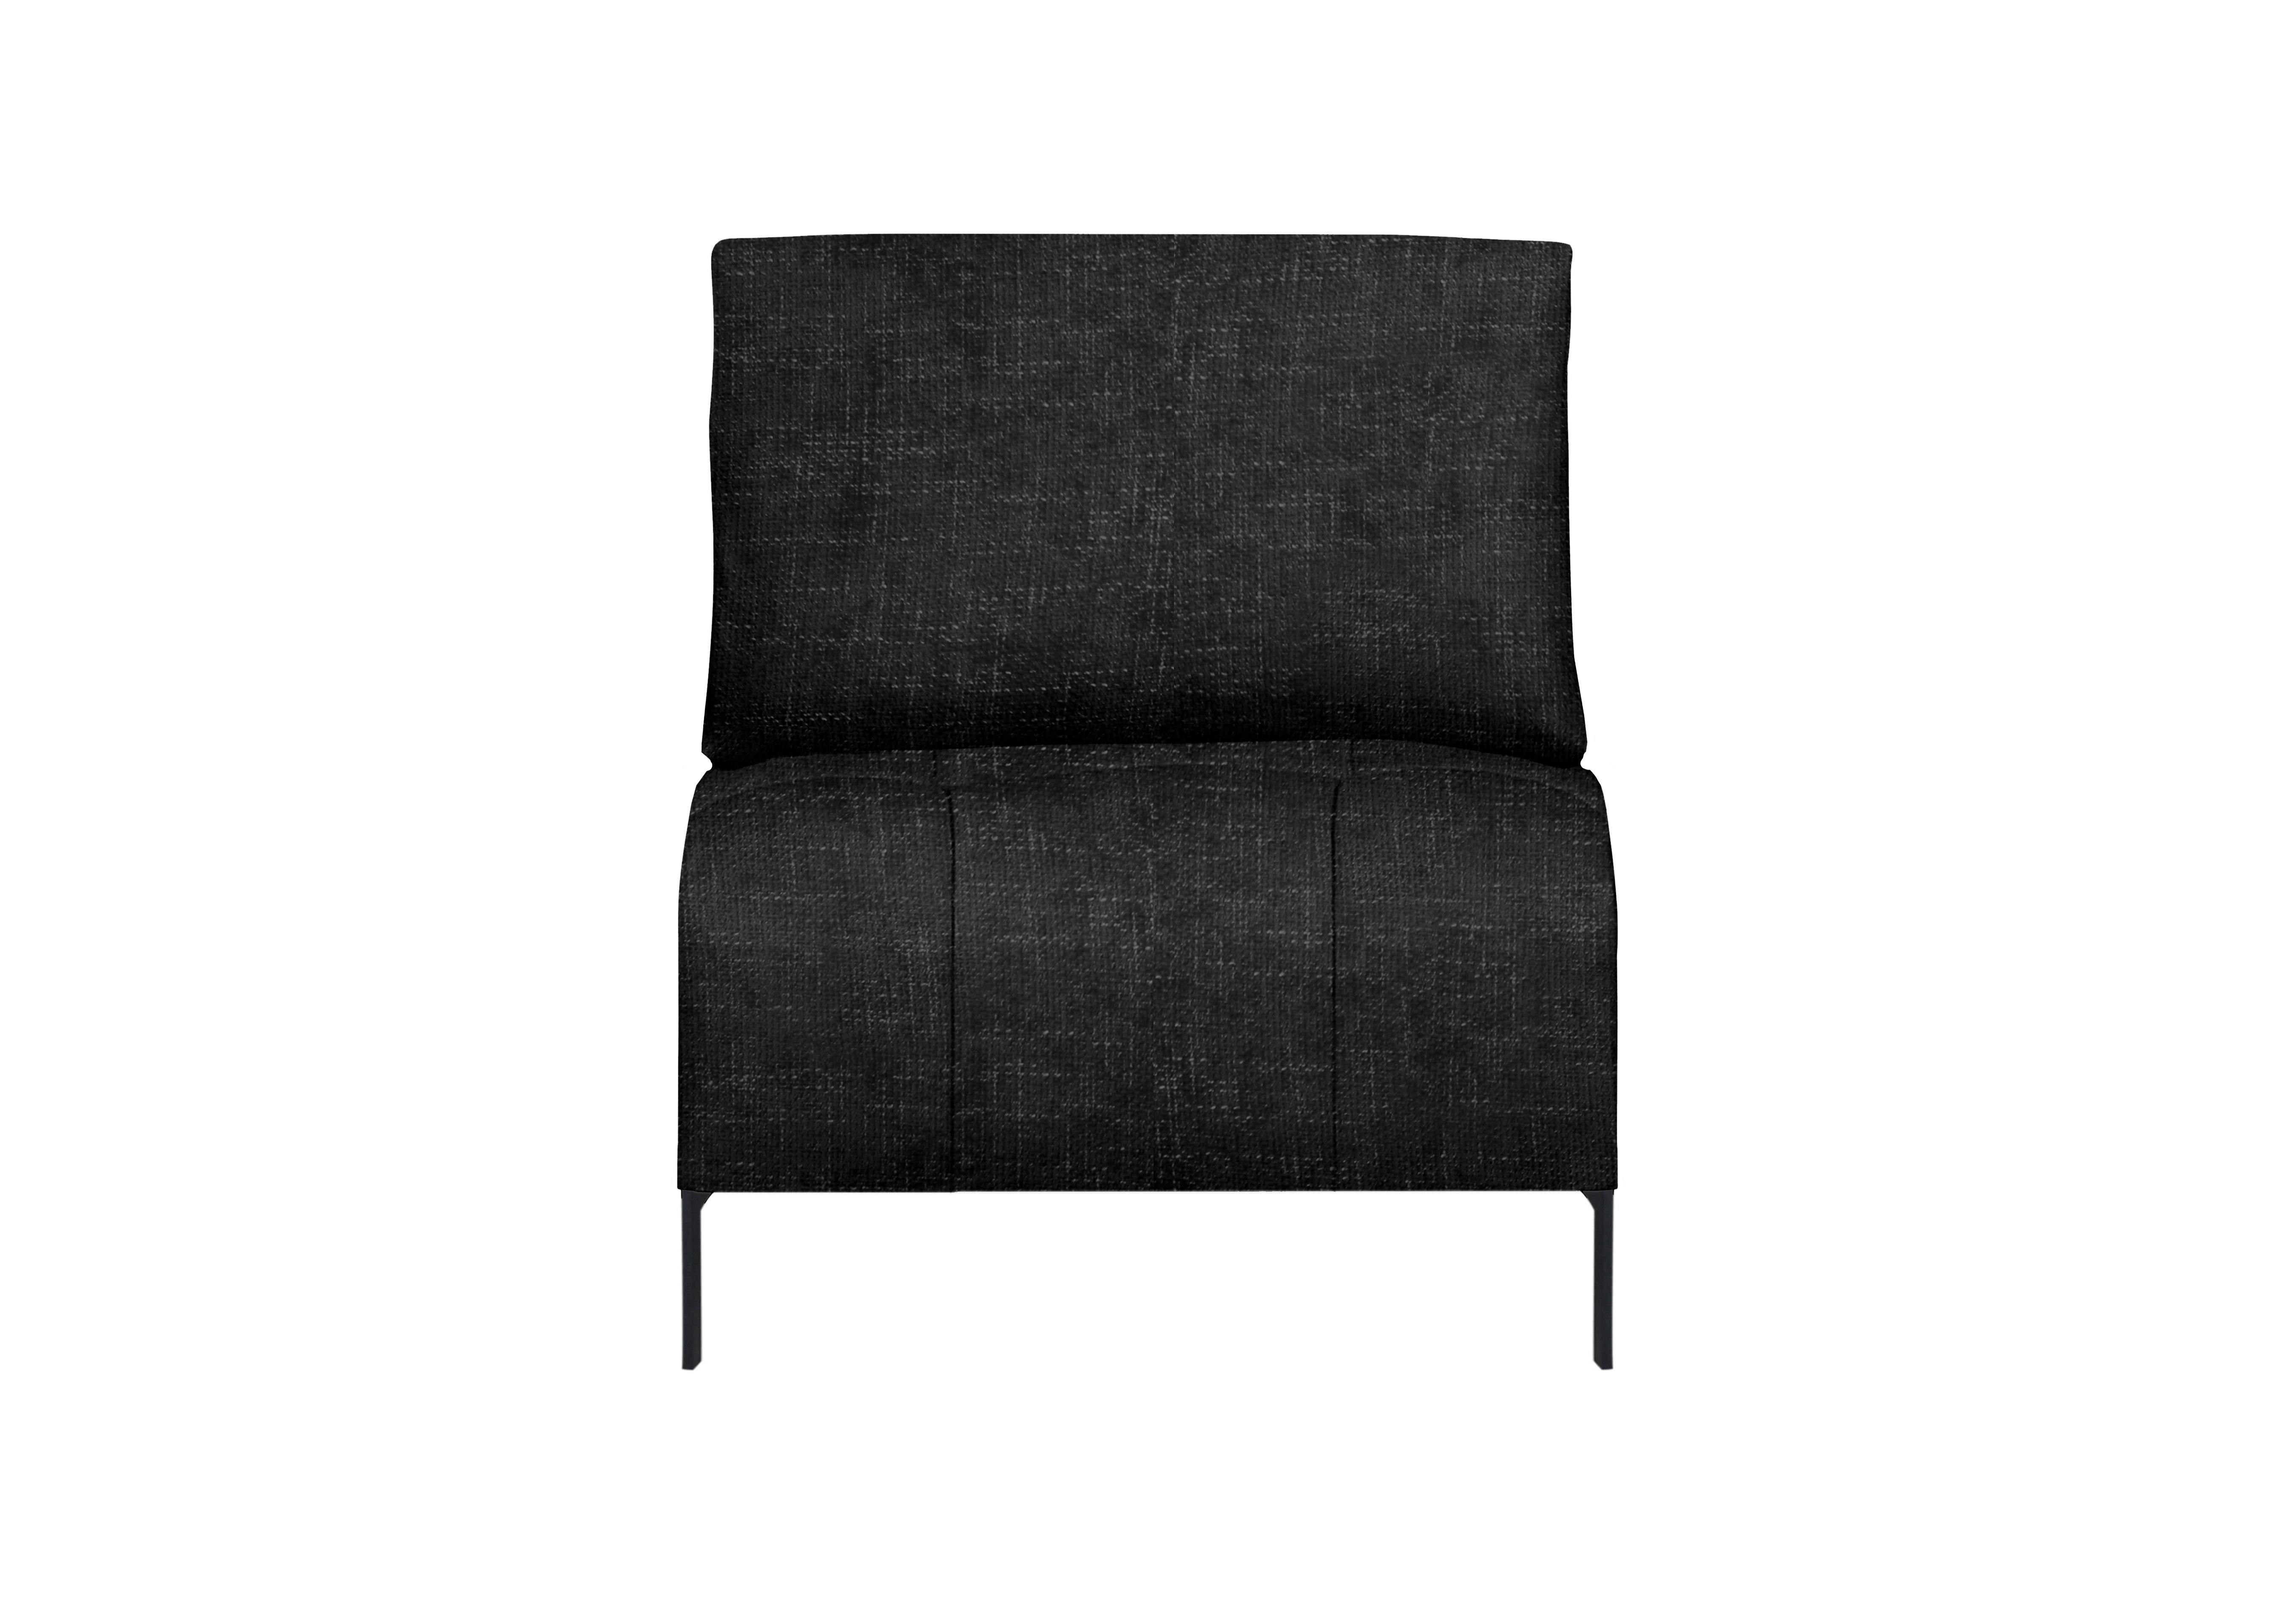 Lawson Fabric 1.5 Seater Armless Unit in Fab-Cac-R463 Black Mica on Furniture Village